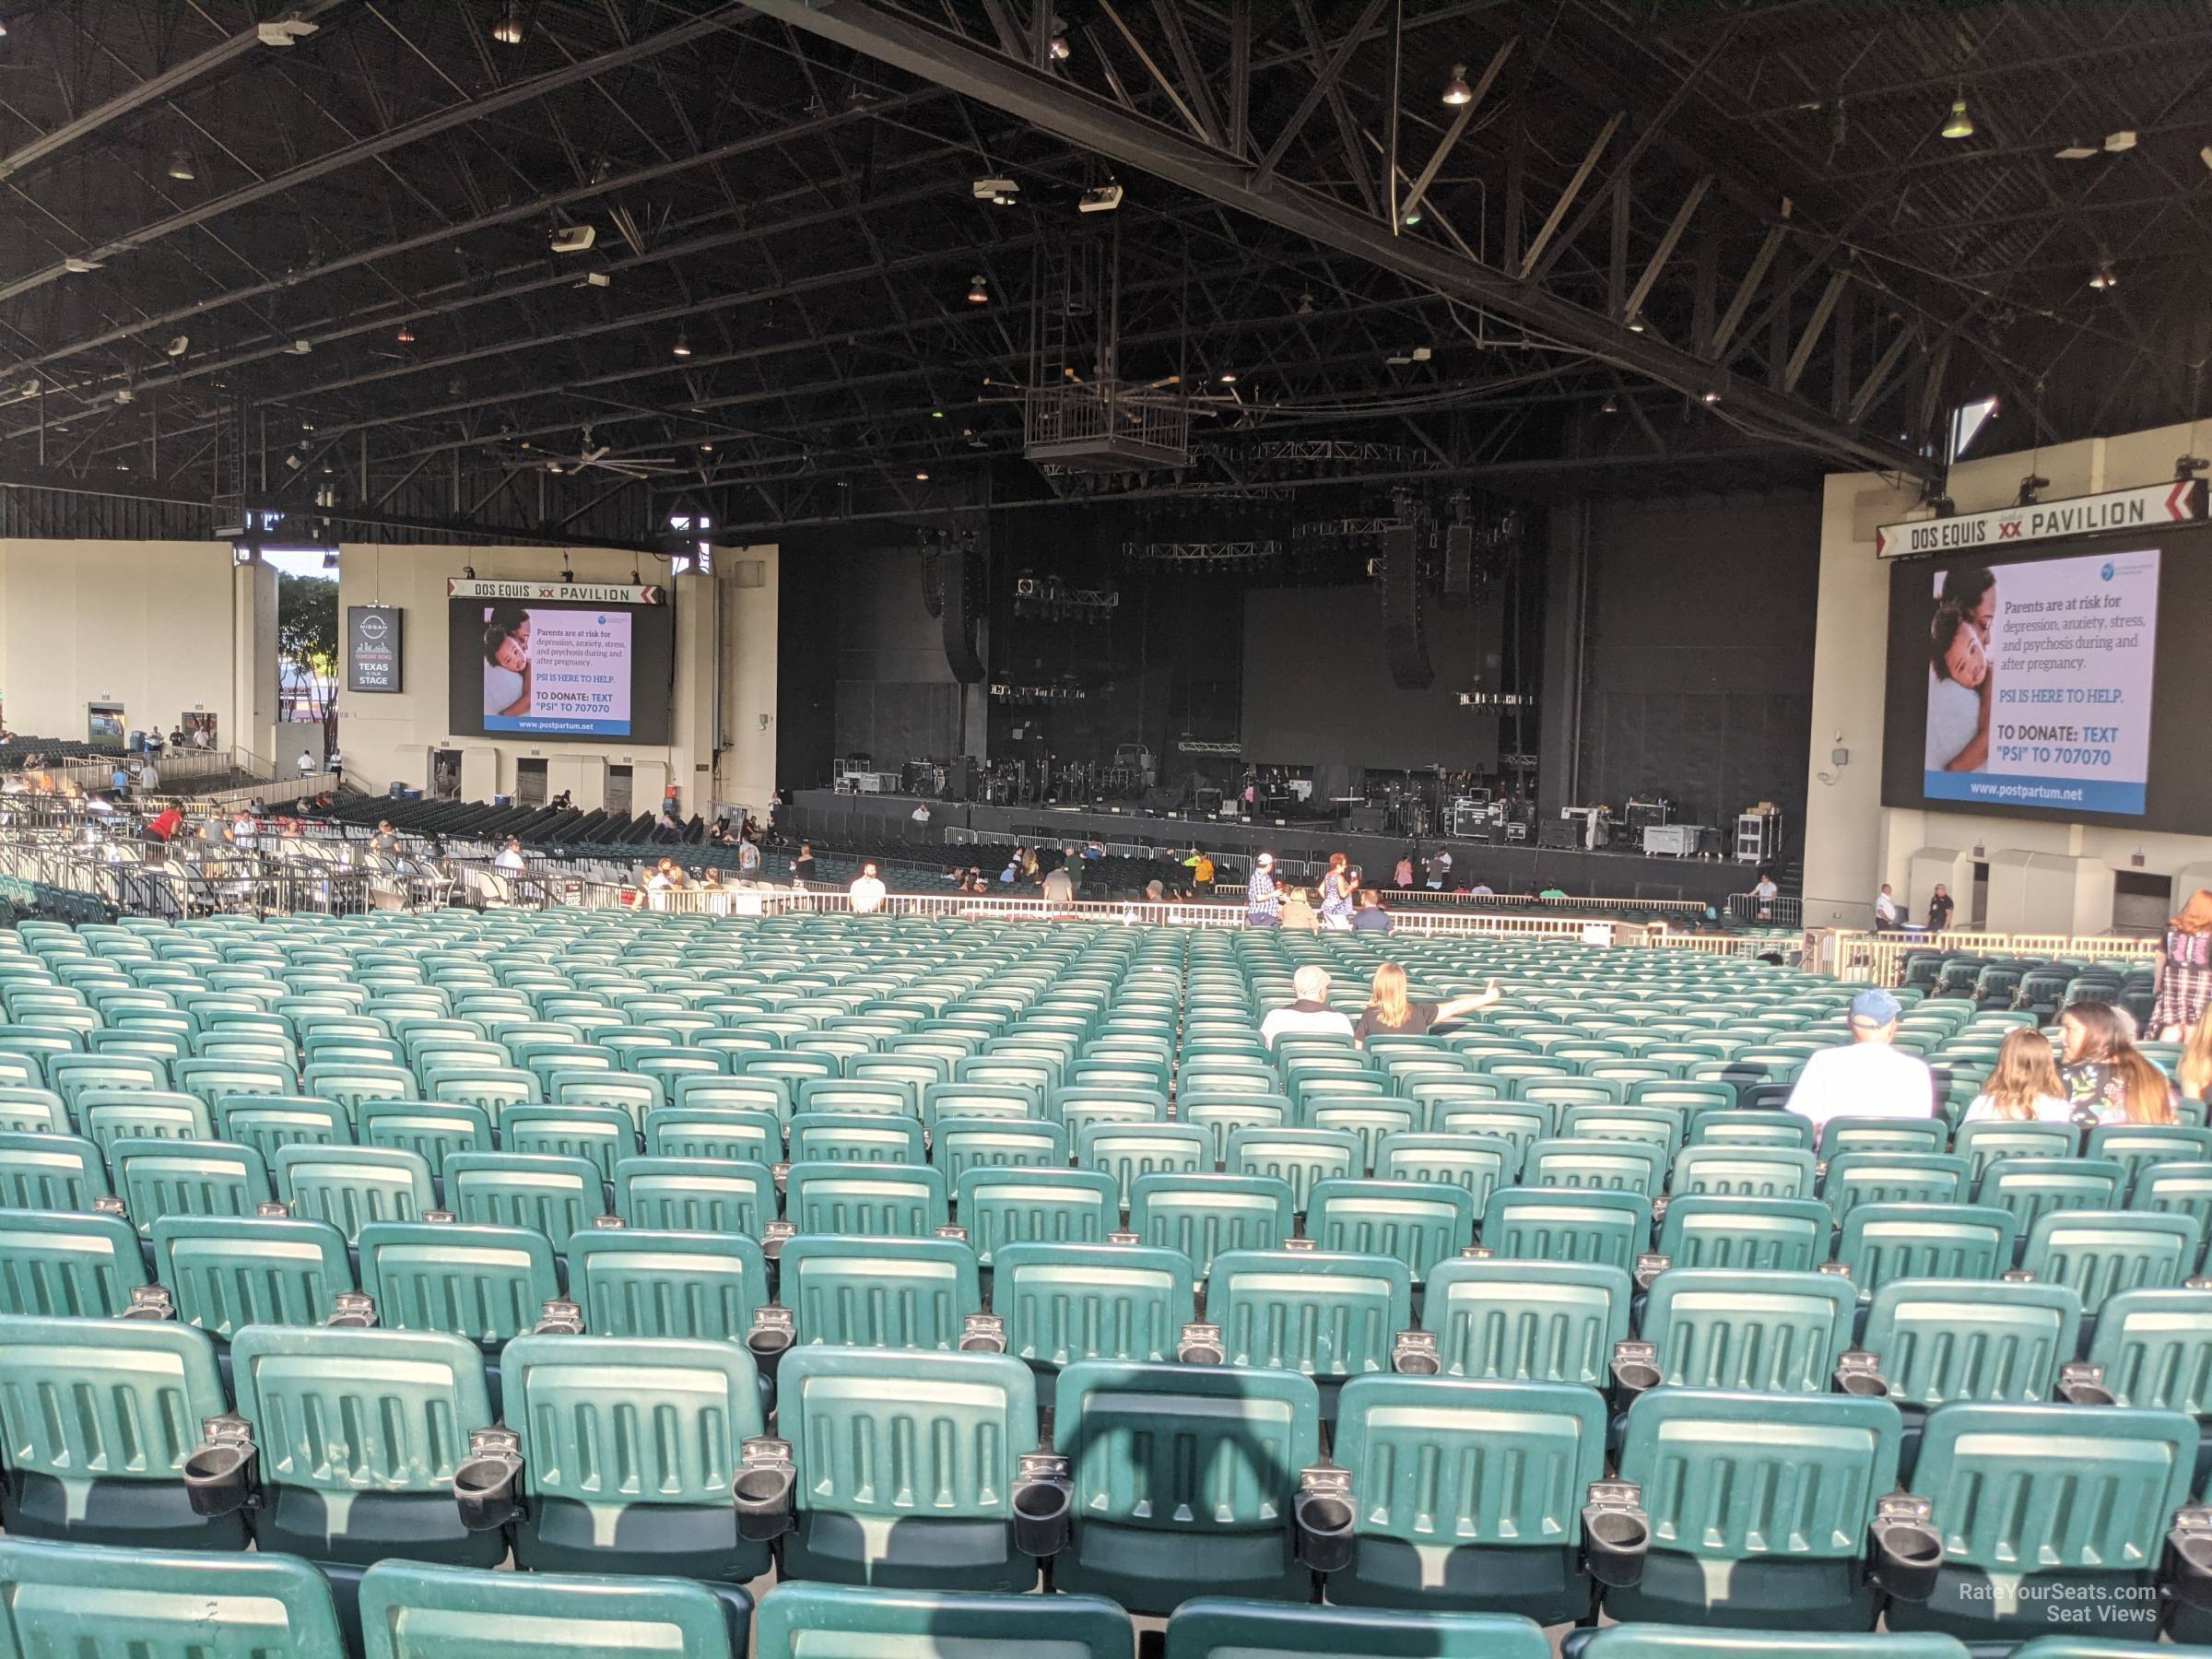 section 201, row dd seat view  - dos equis pavilion